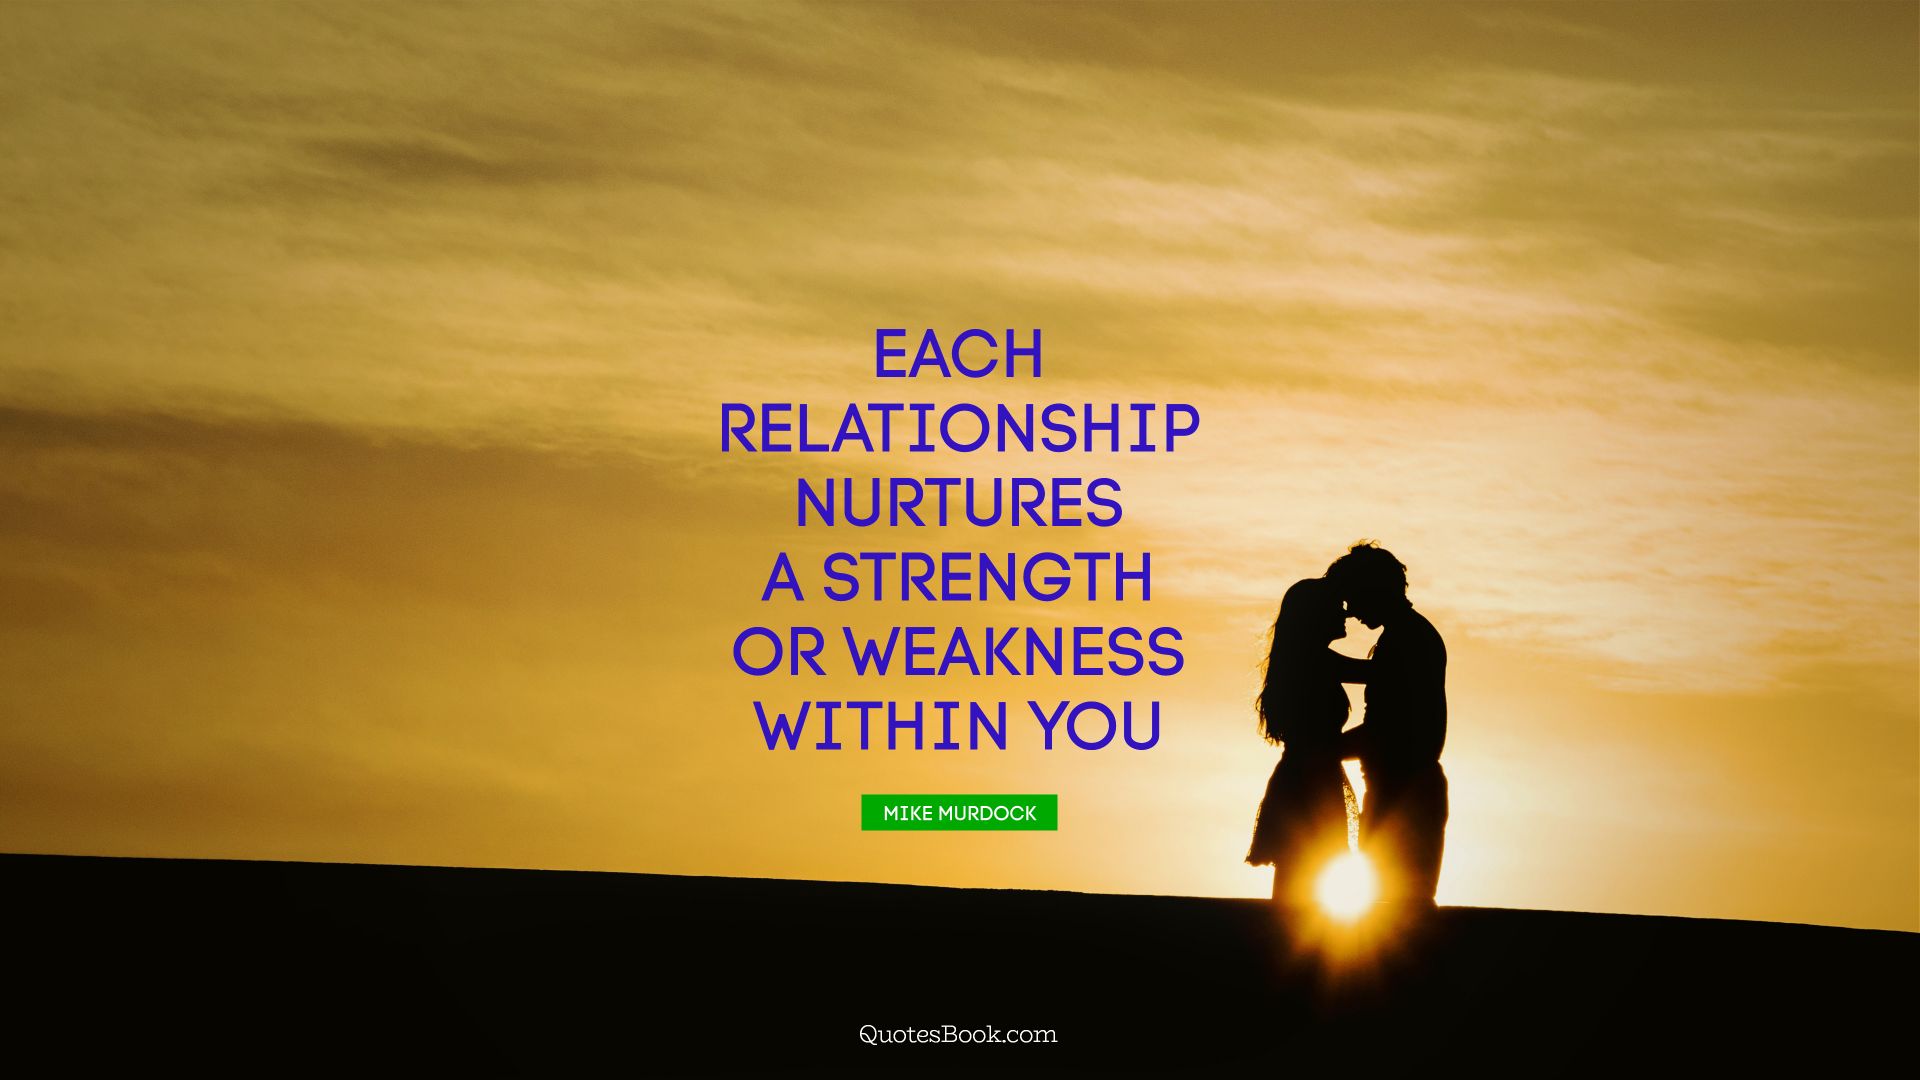 Each relationship nurtures a strength or weakness within you. - Quote by Mike Murdock